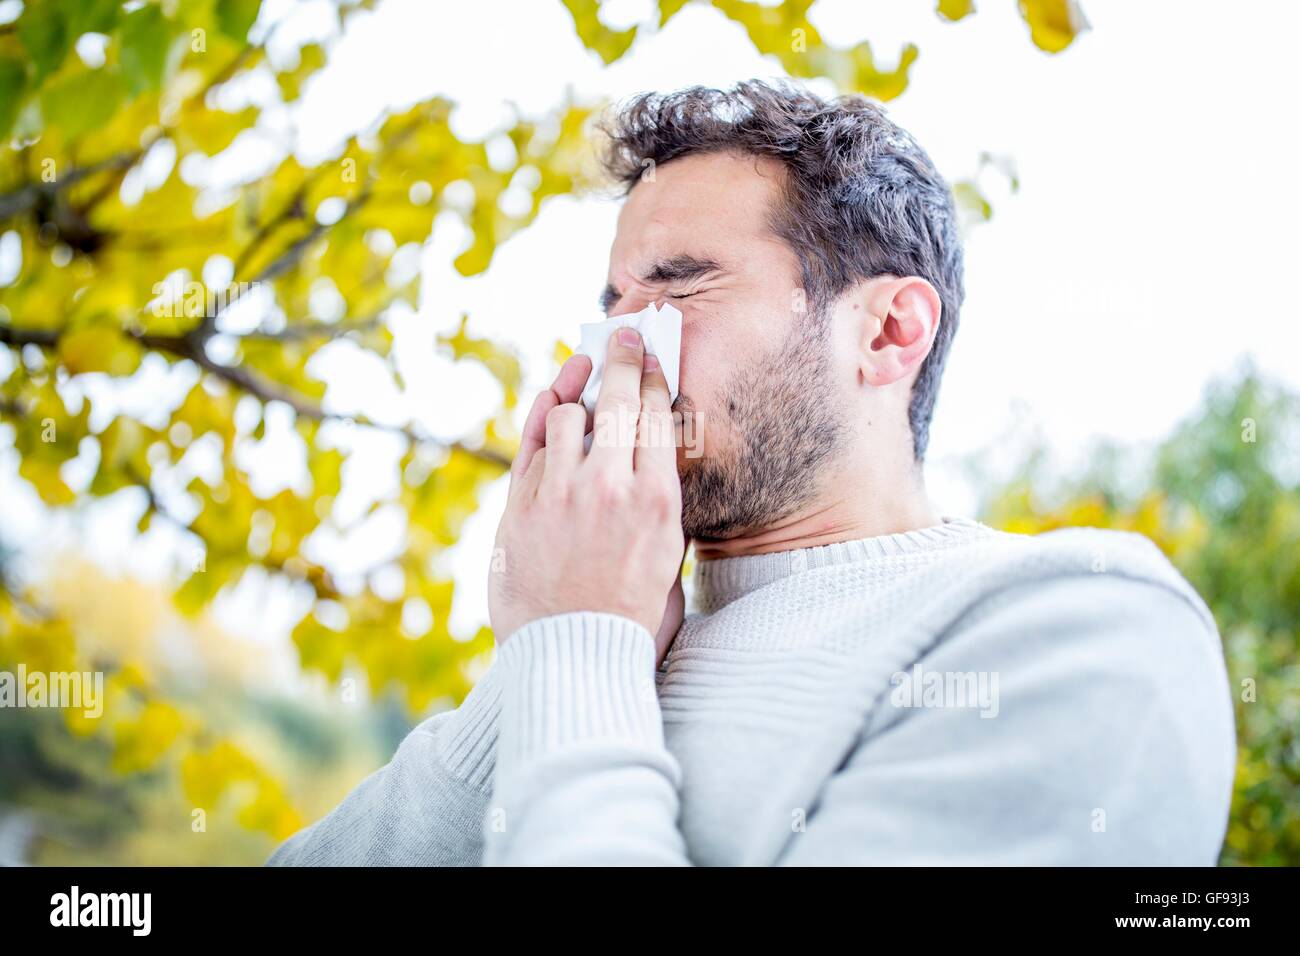 MODEL RELEASED. Young man sneezing, close-up. Stock Photo